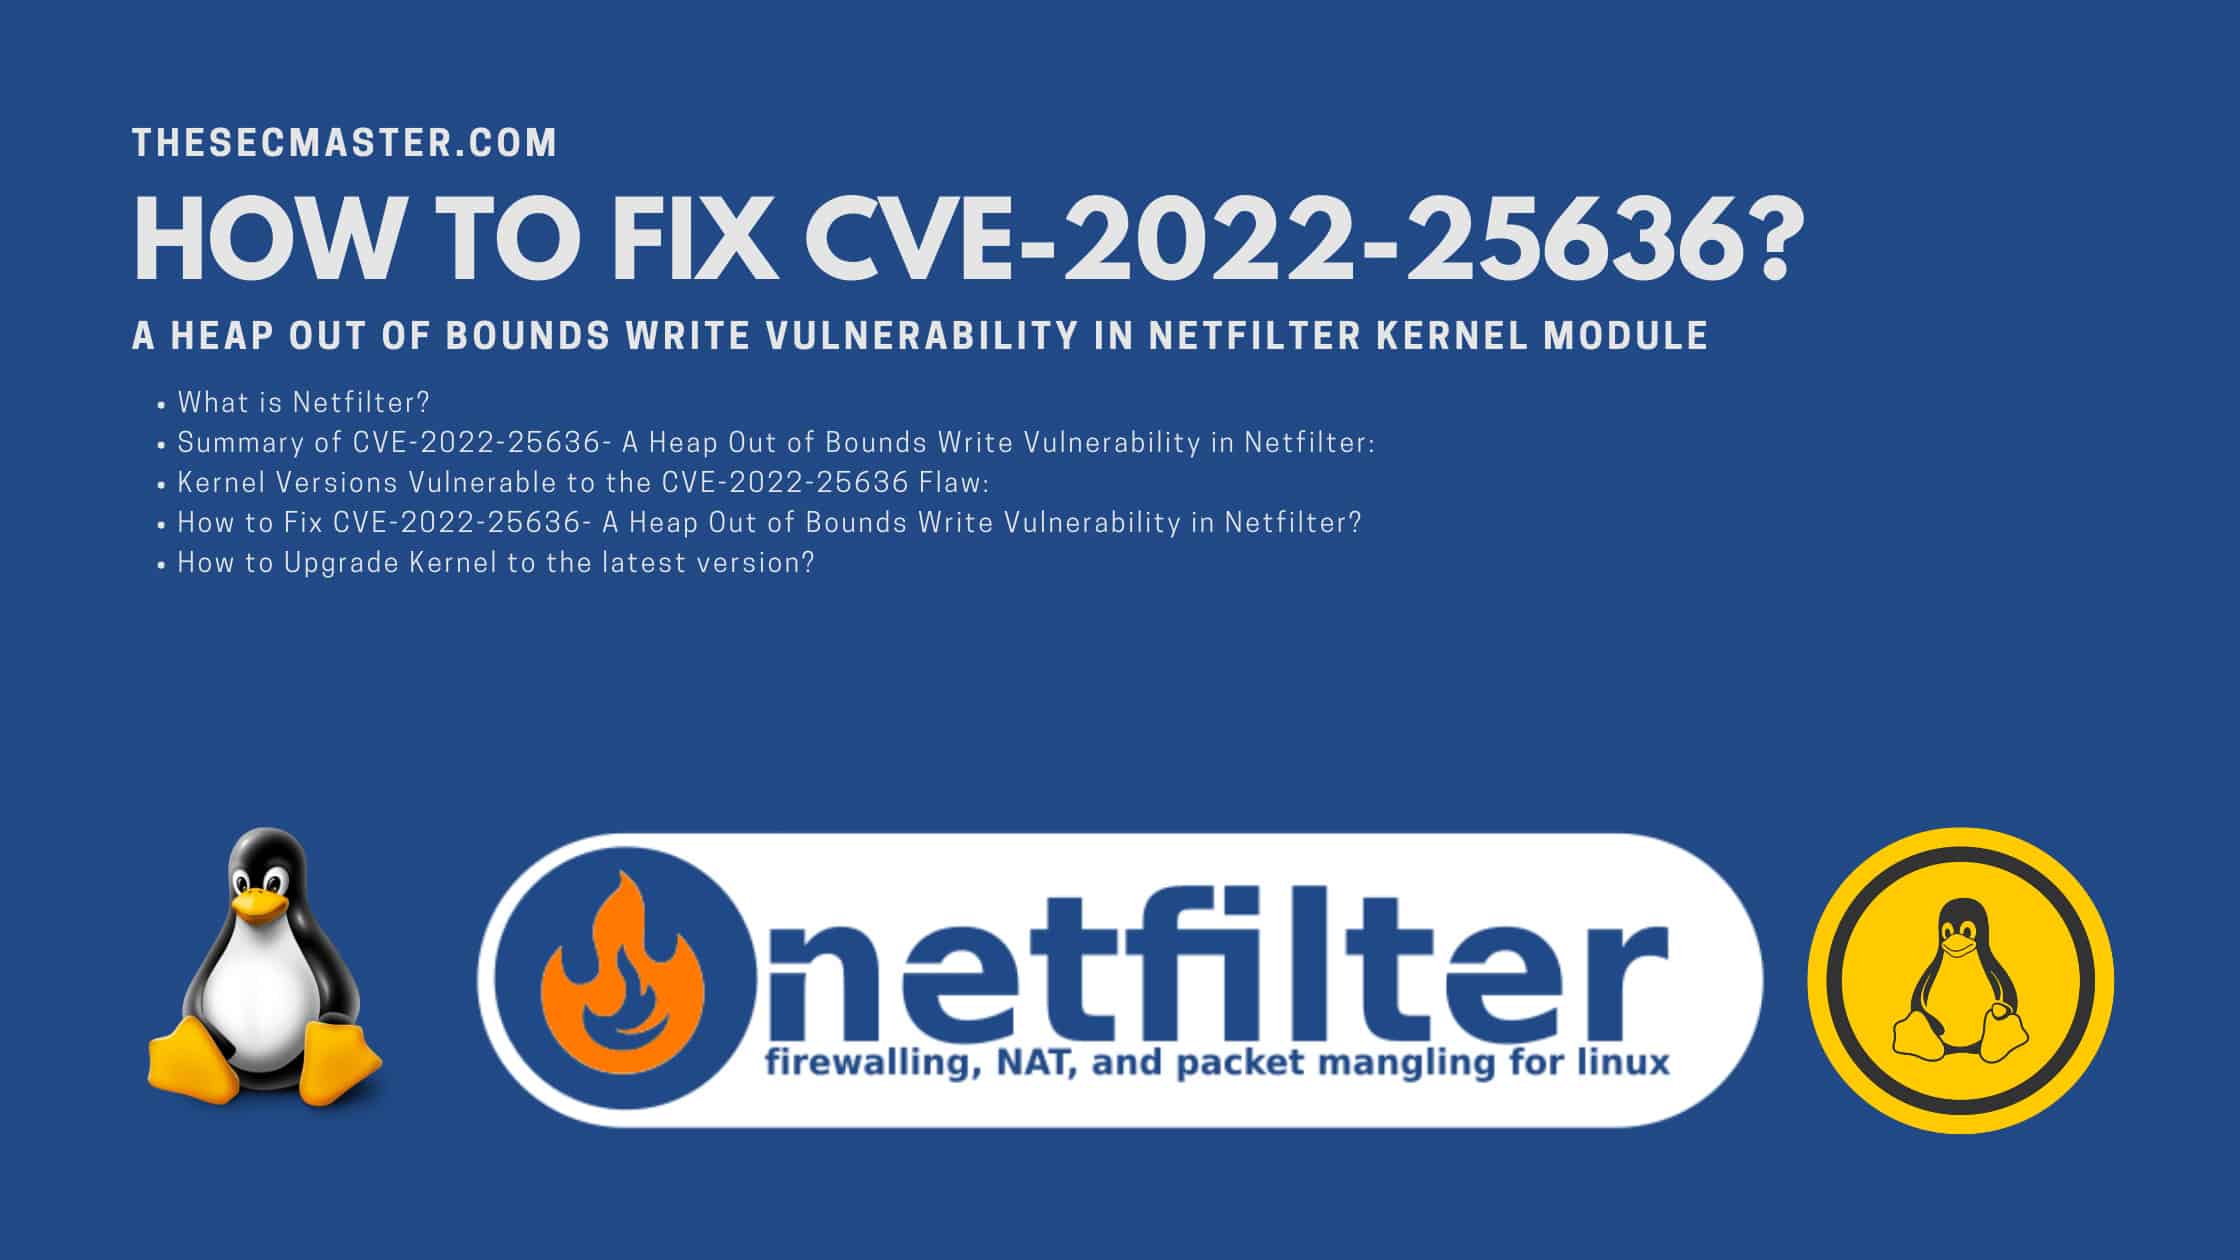 How To Fix Cve 2022 25636 A Heap Out Of Bounds Write Vulnerability In Netfilter